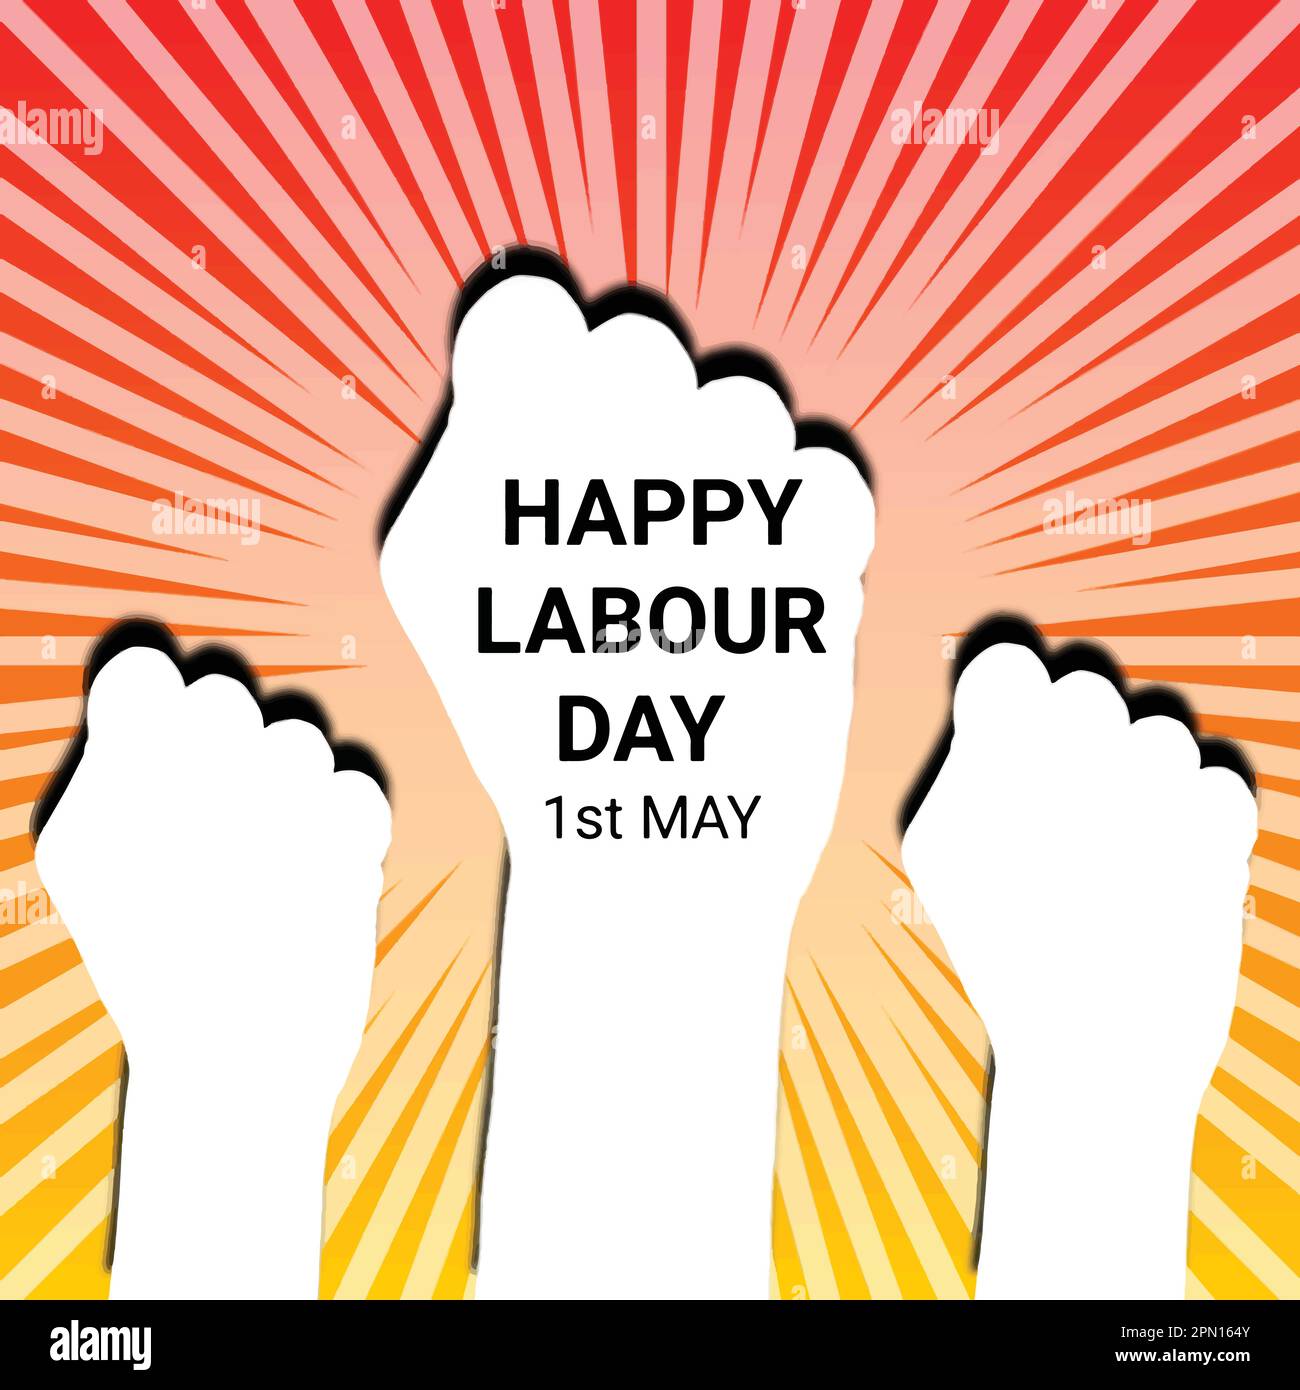 Happy Labour Day background with hands and rays. 1st May. Vector illustration. Eps 10 Stock Vector